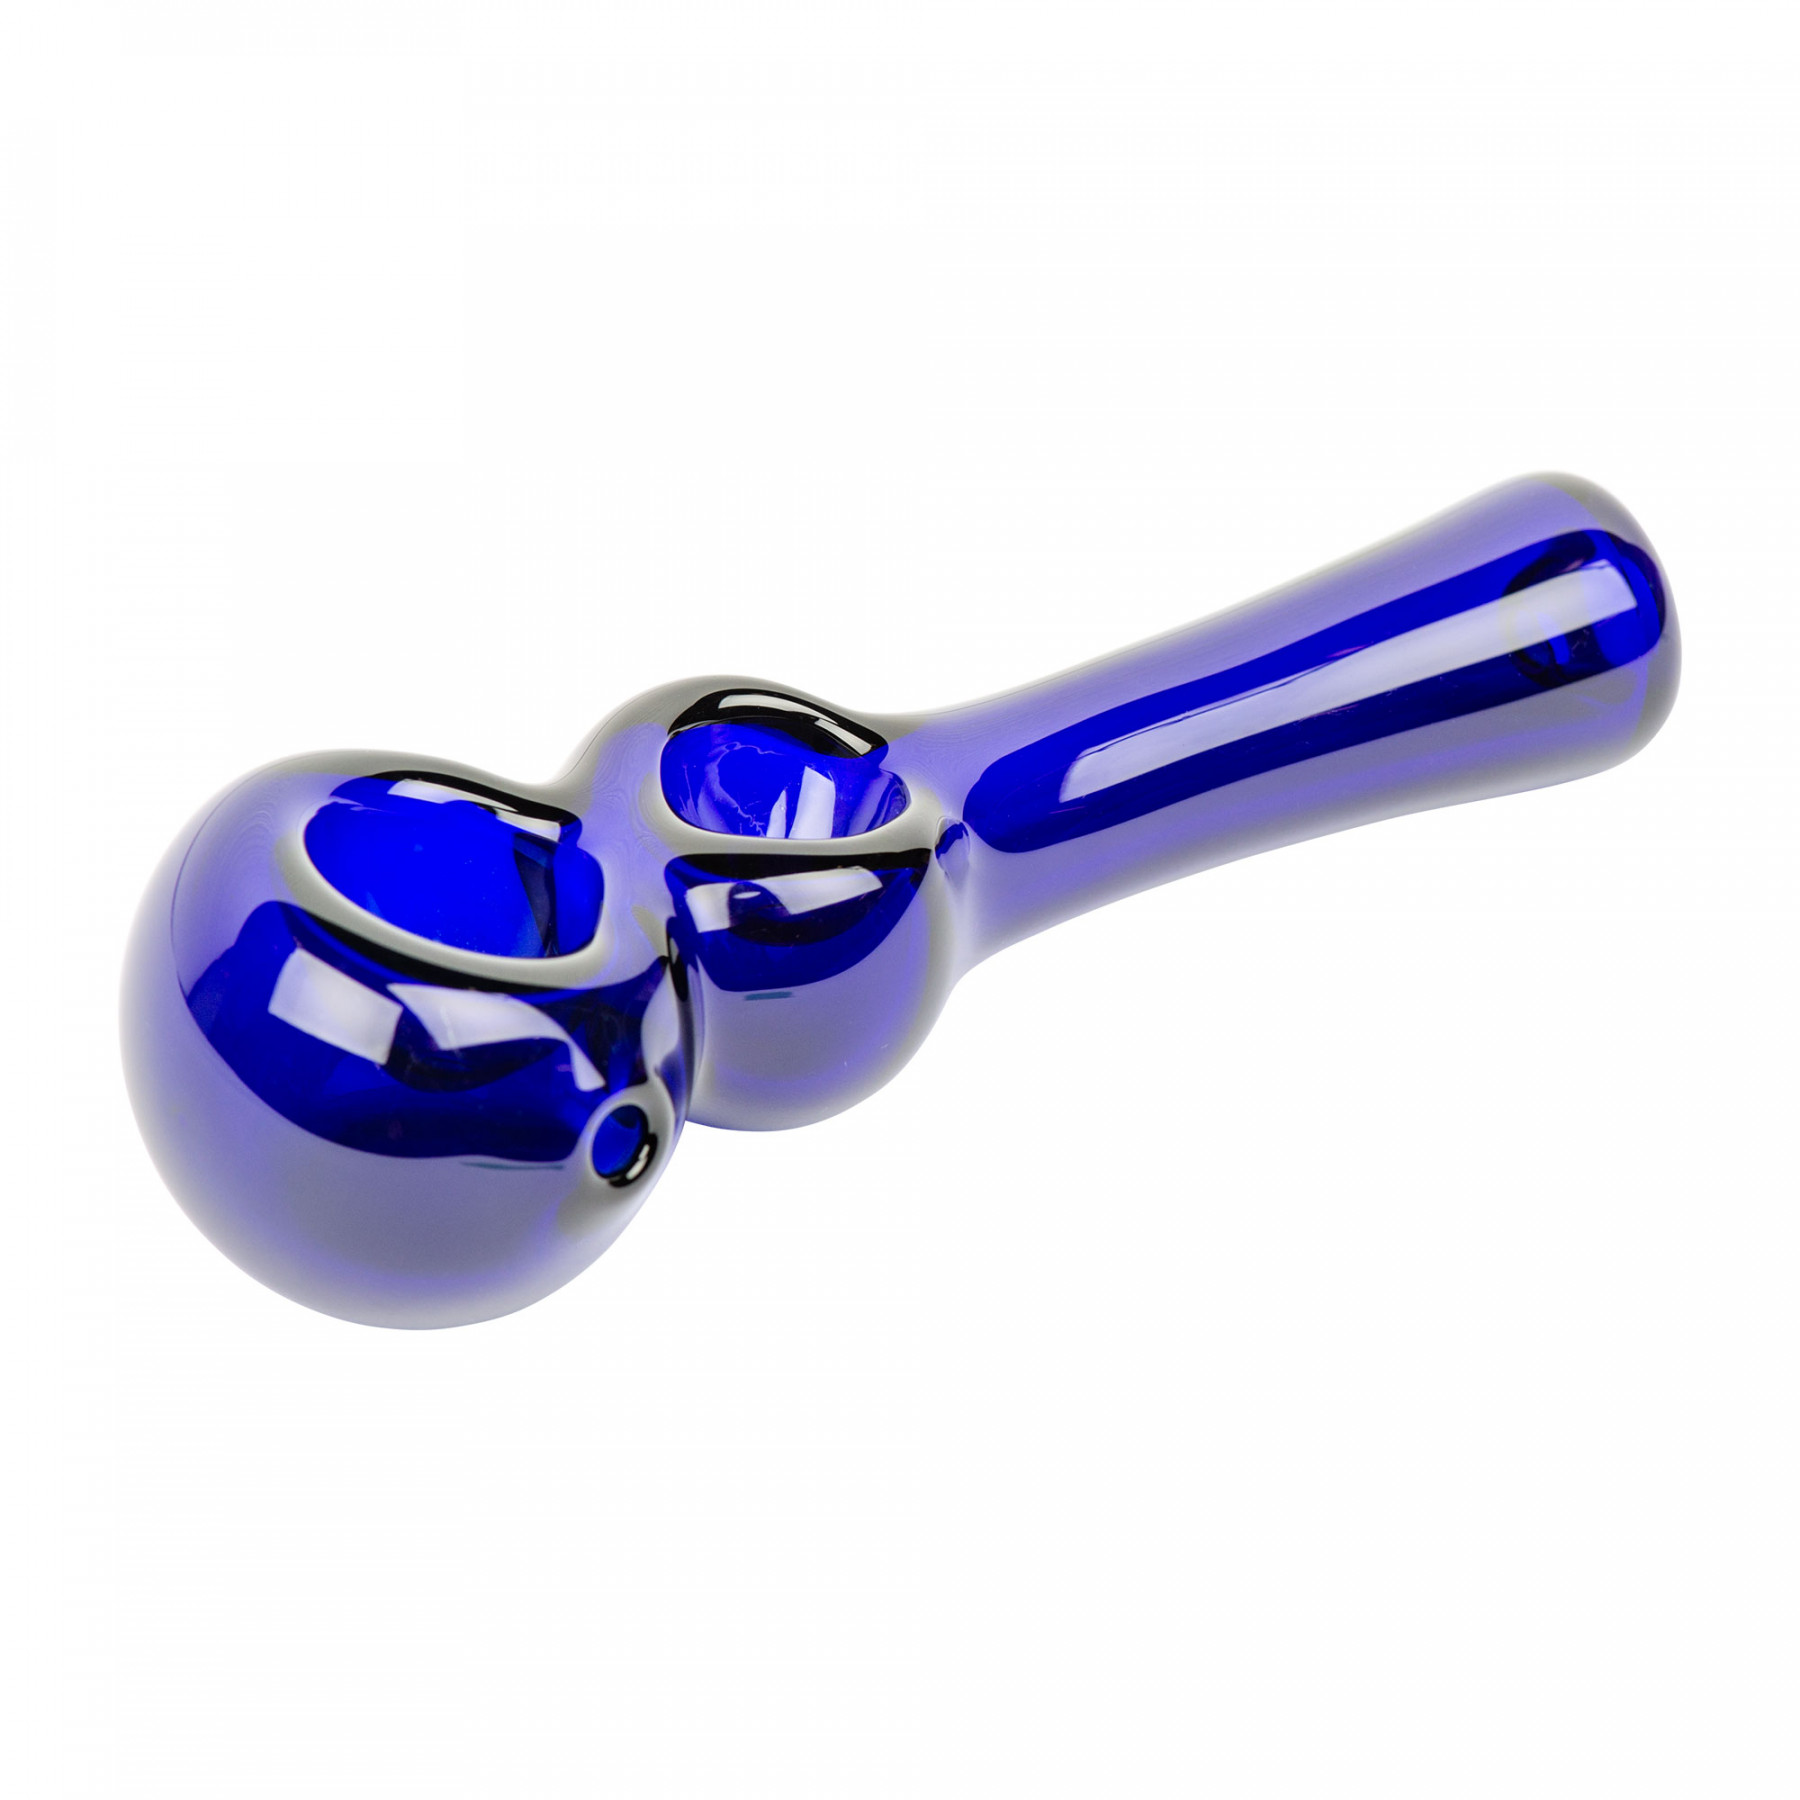 4.5" Twice Baked Hand Pipe